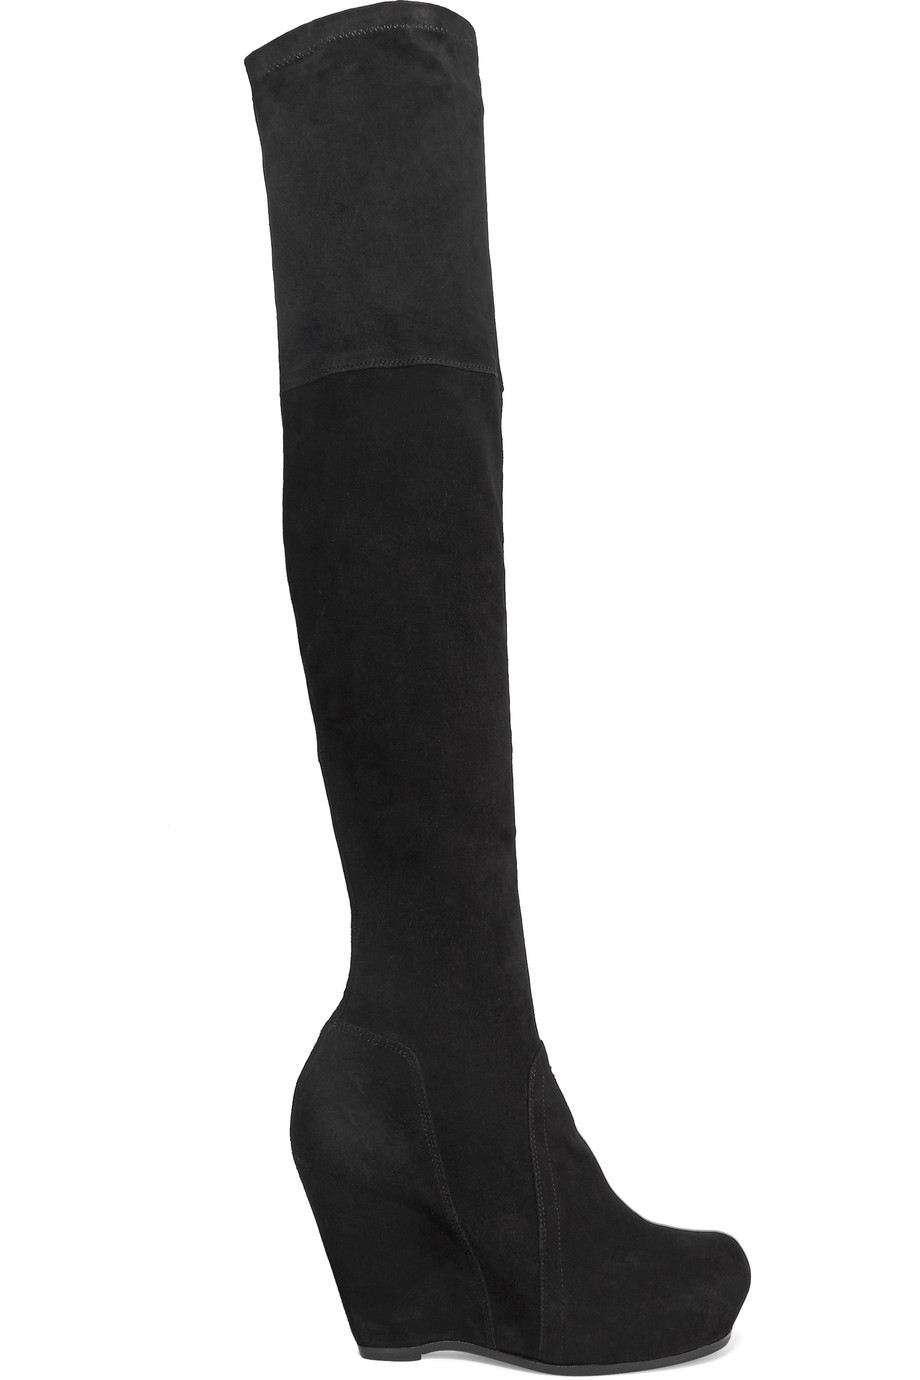 Rick Owens Suede Over-the-knee Boots | ModeSens